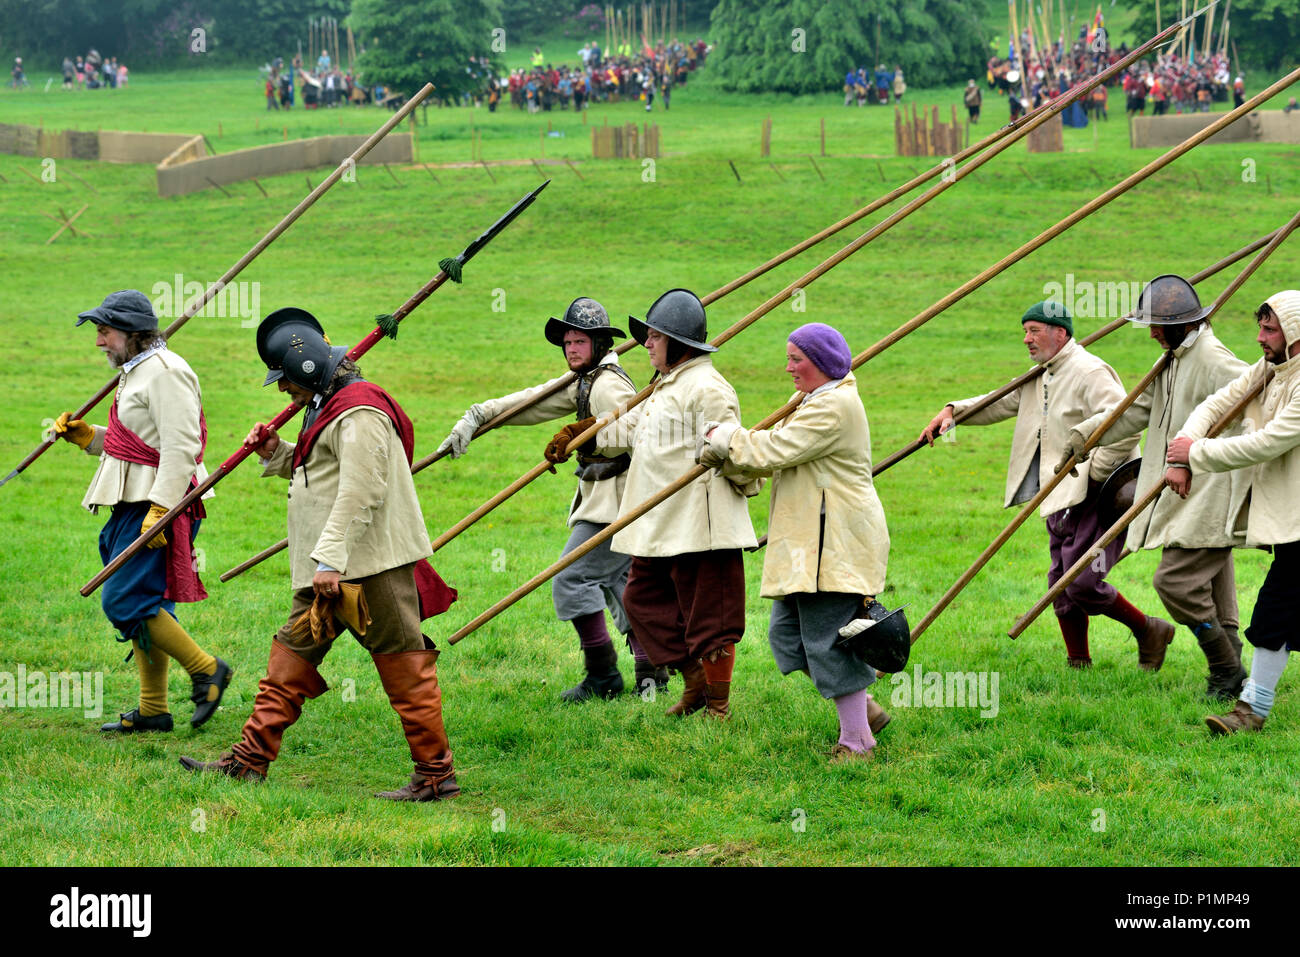 Pikemen foot soldiers marching carrying their pikes in 17th century buff coat costumes in English Civil War reenactment Stock Photo